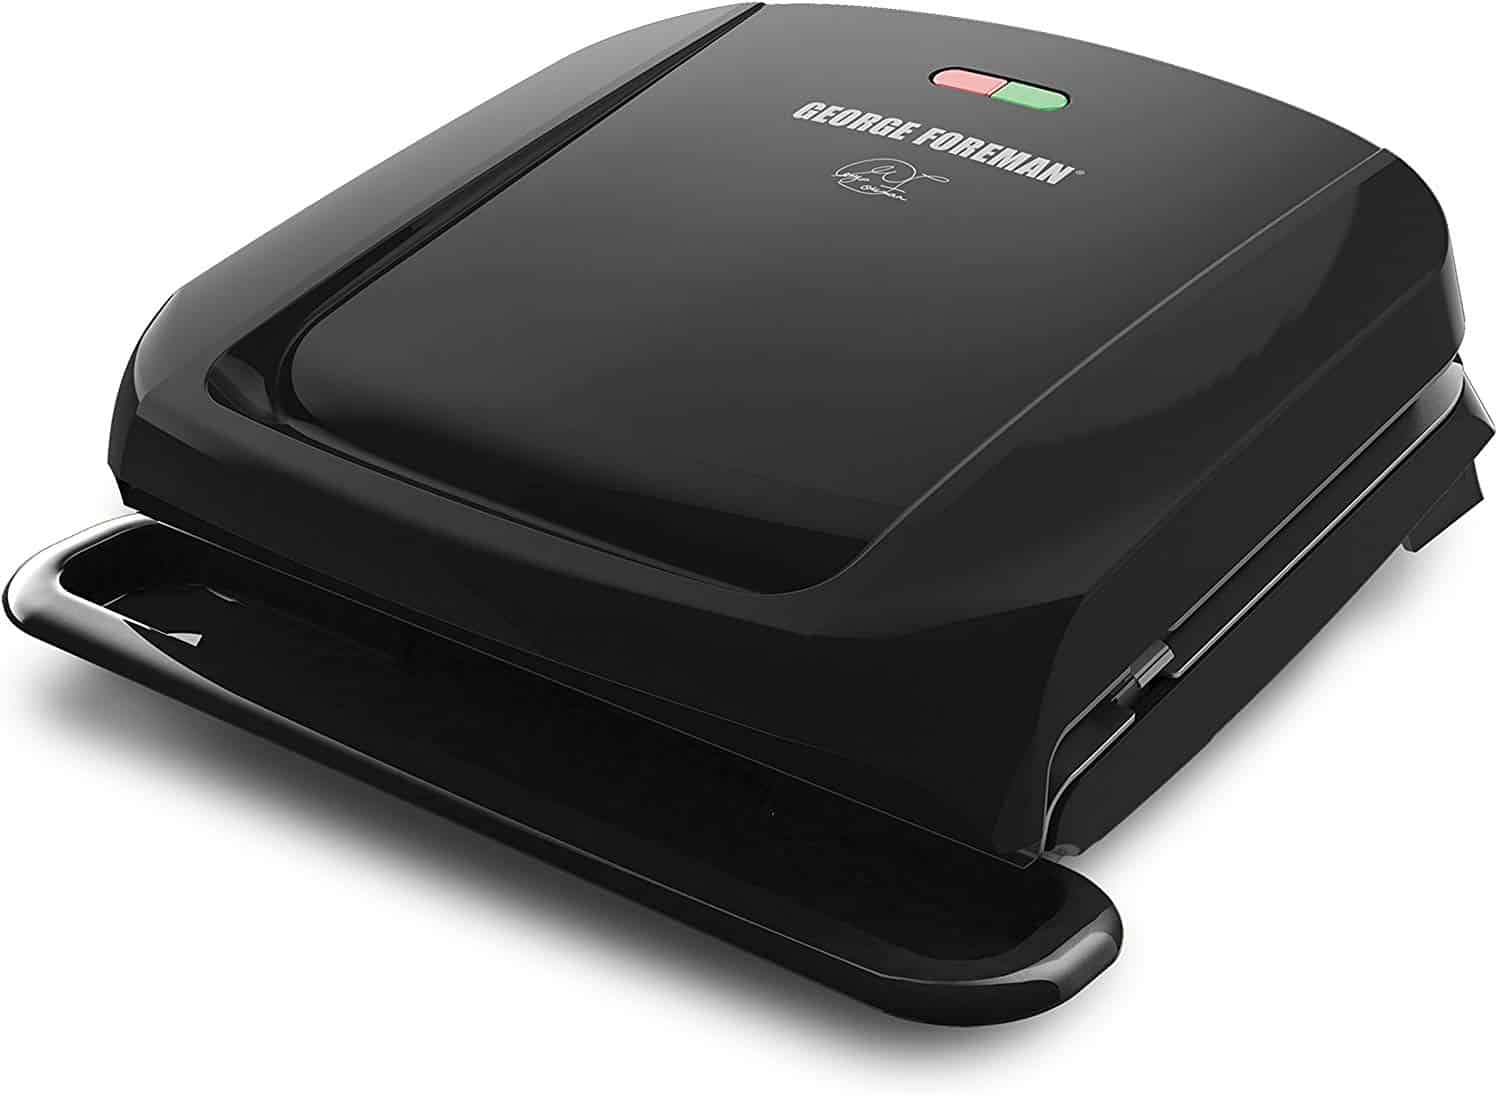 George foreman 4 serving removable plate grill and panini press